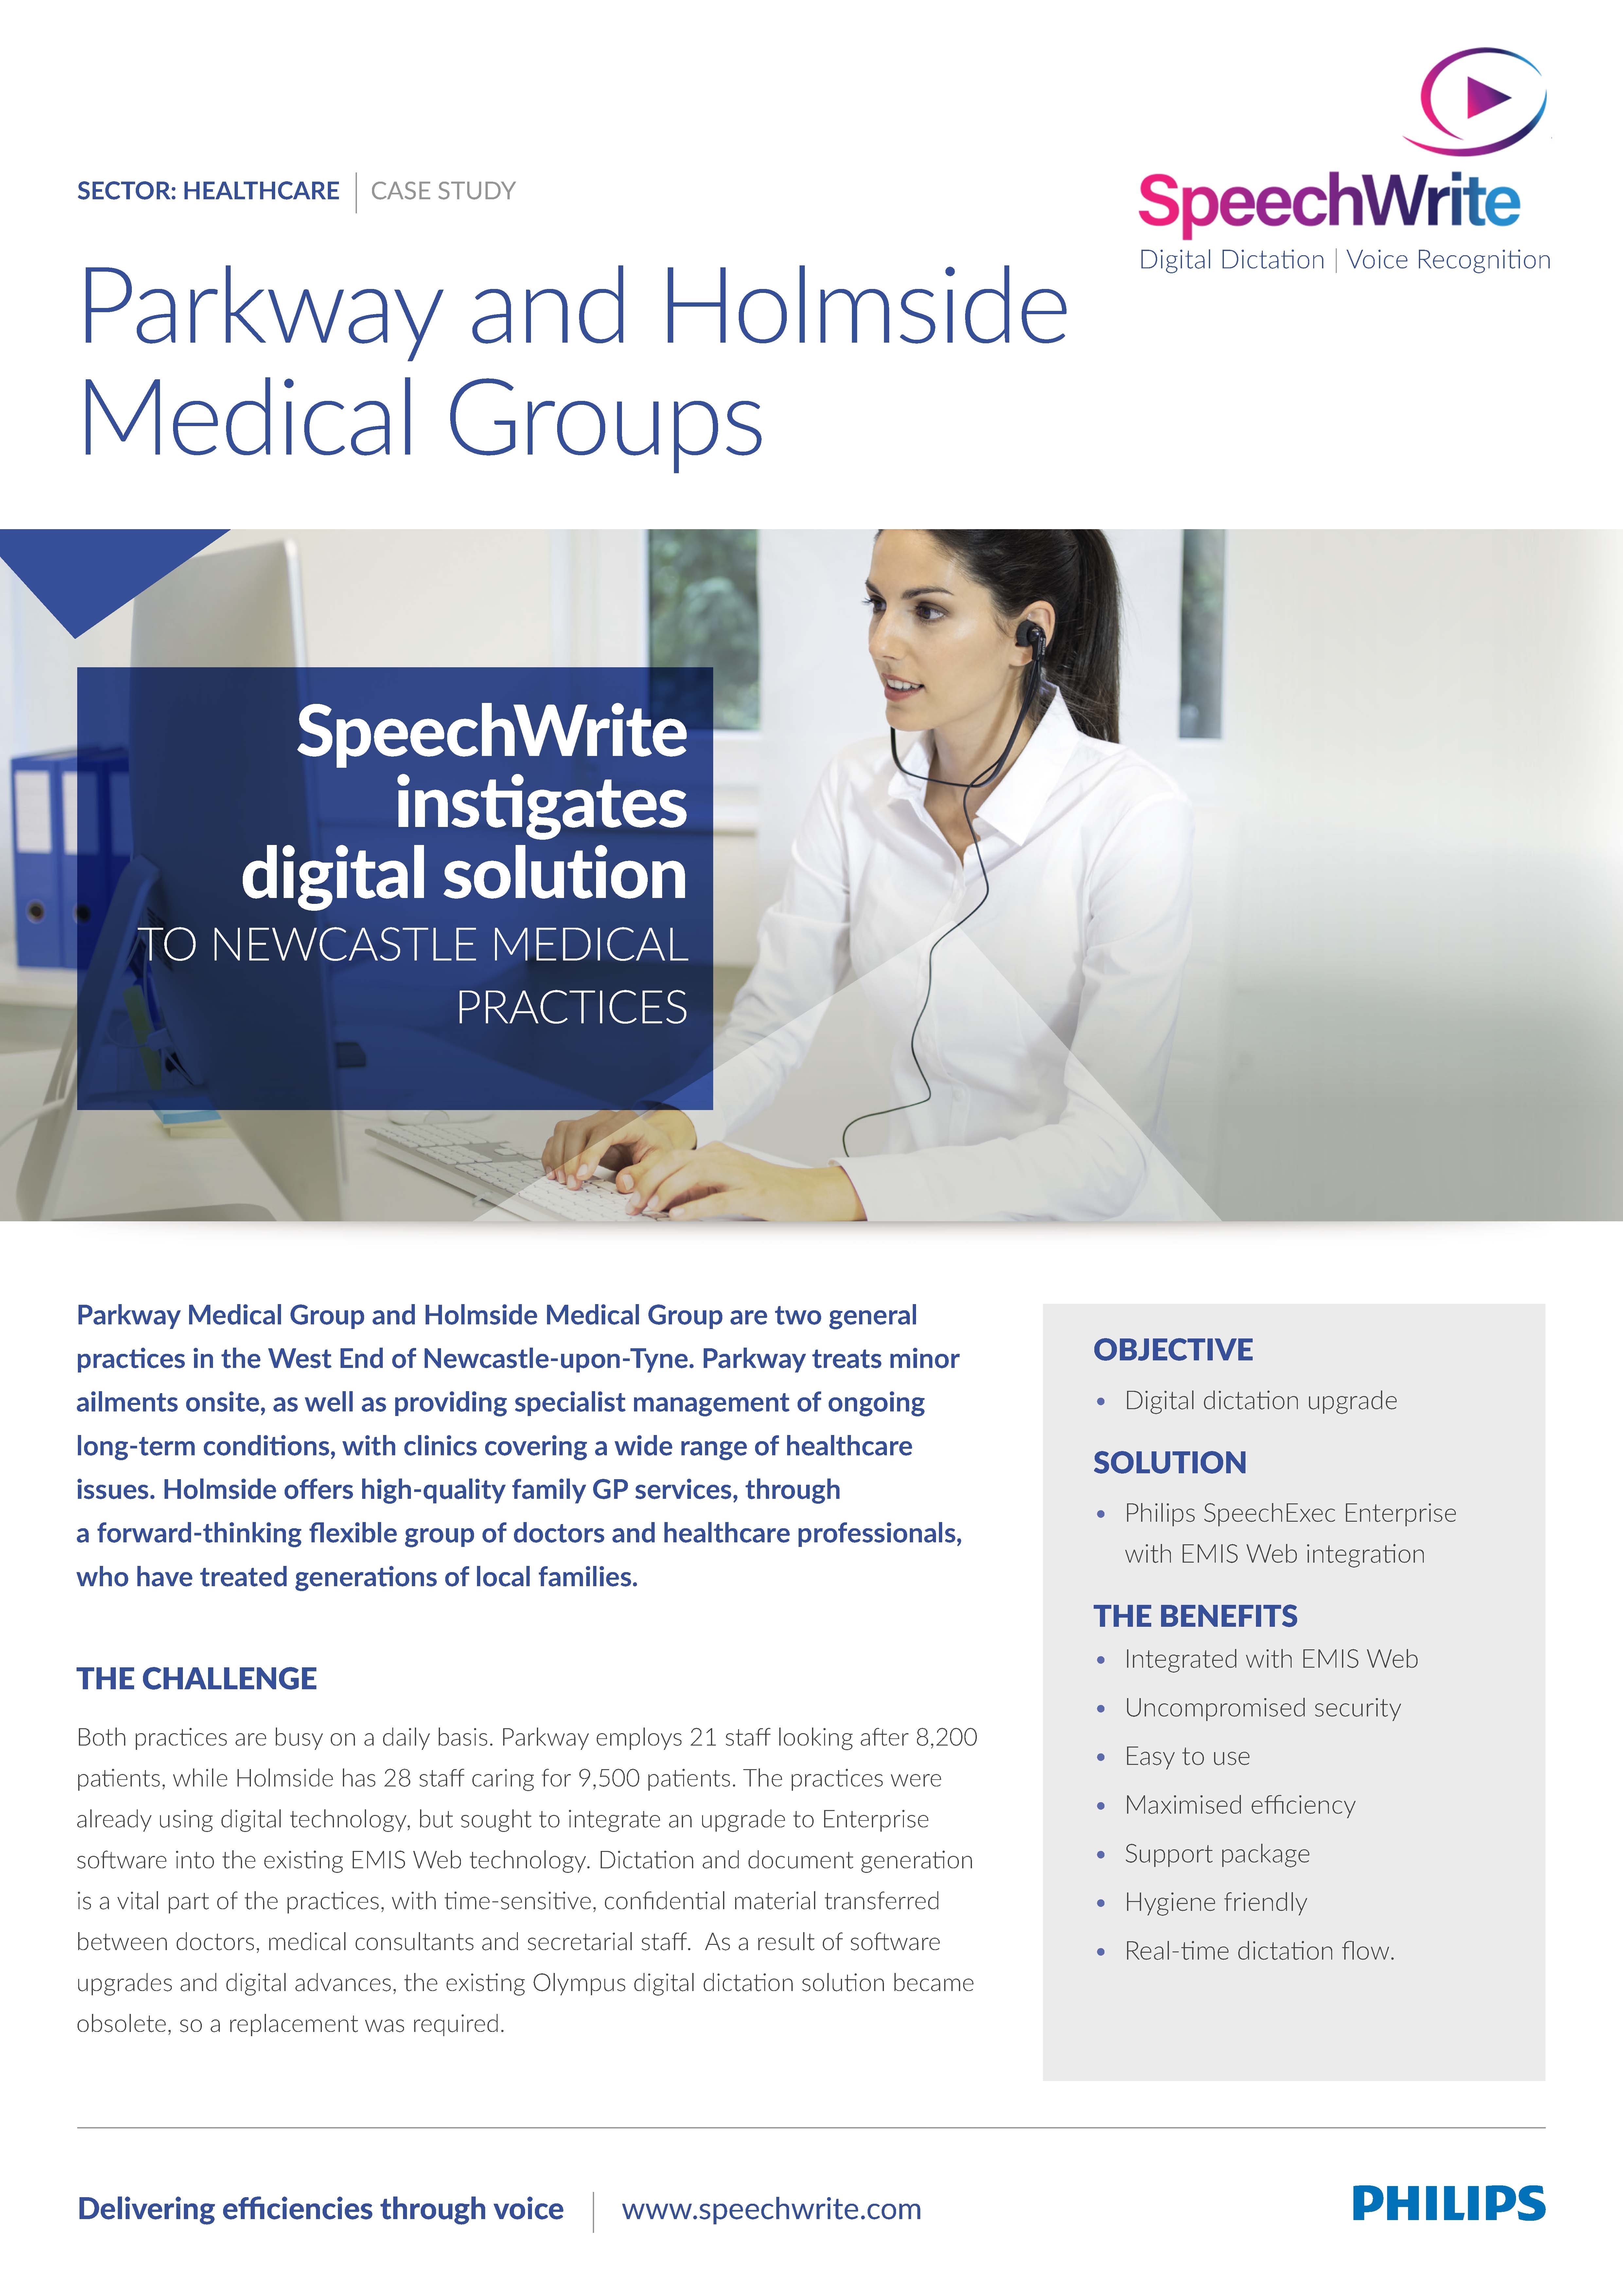 White Papers, Case Studies & Brochures